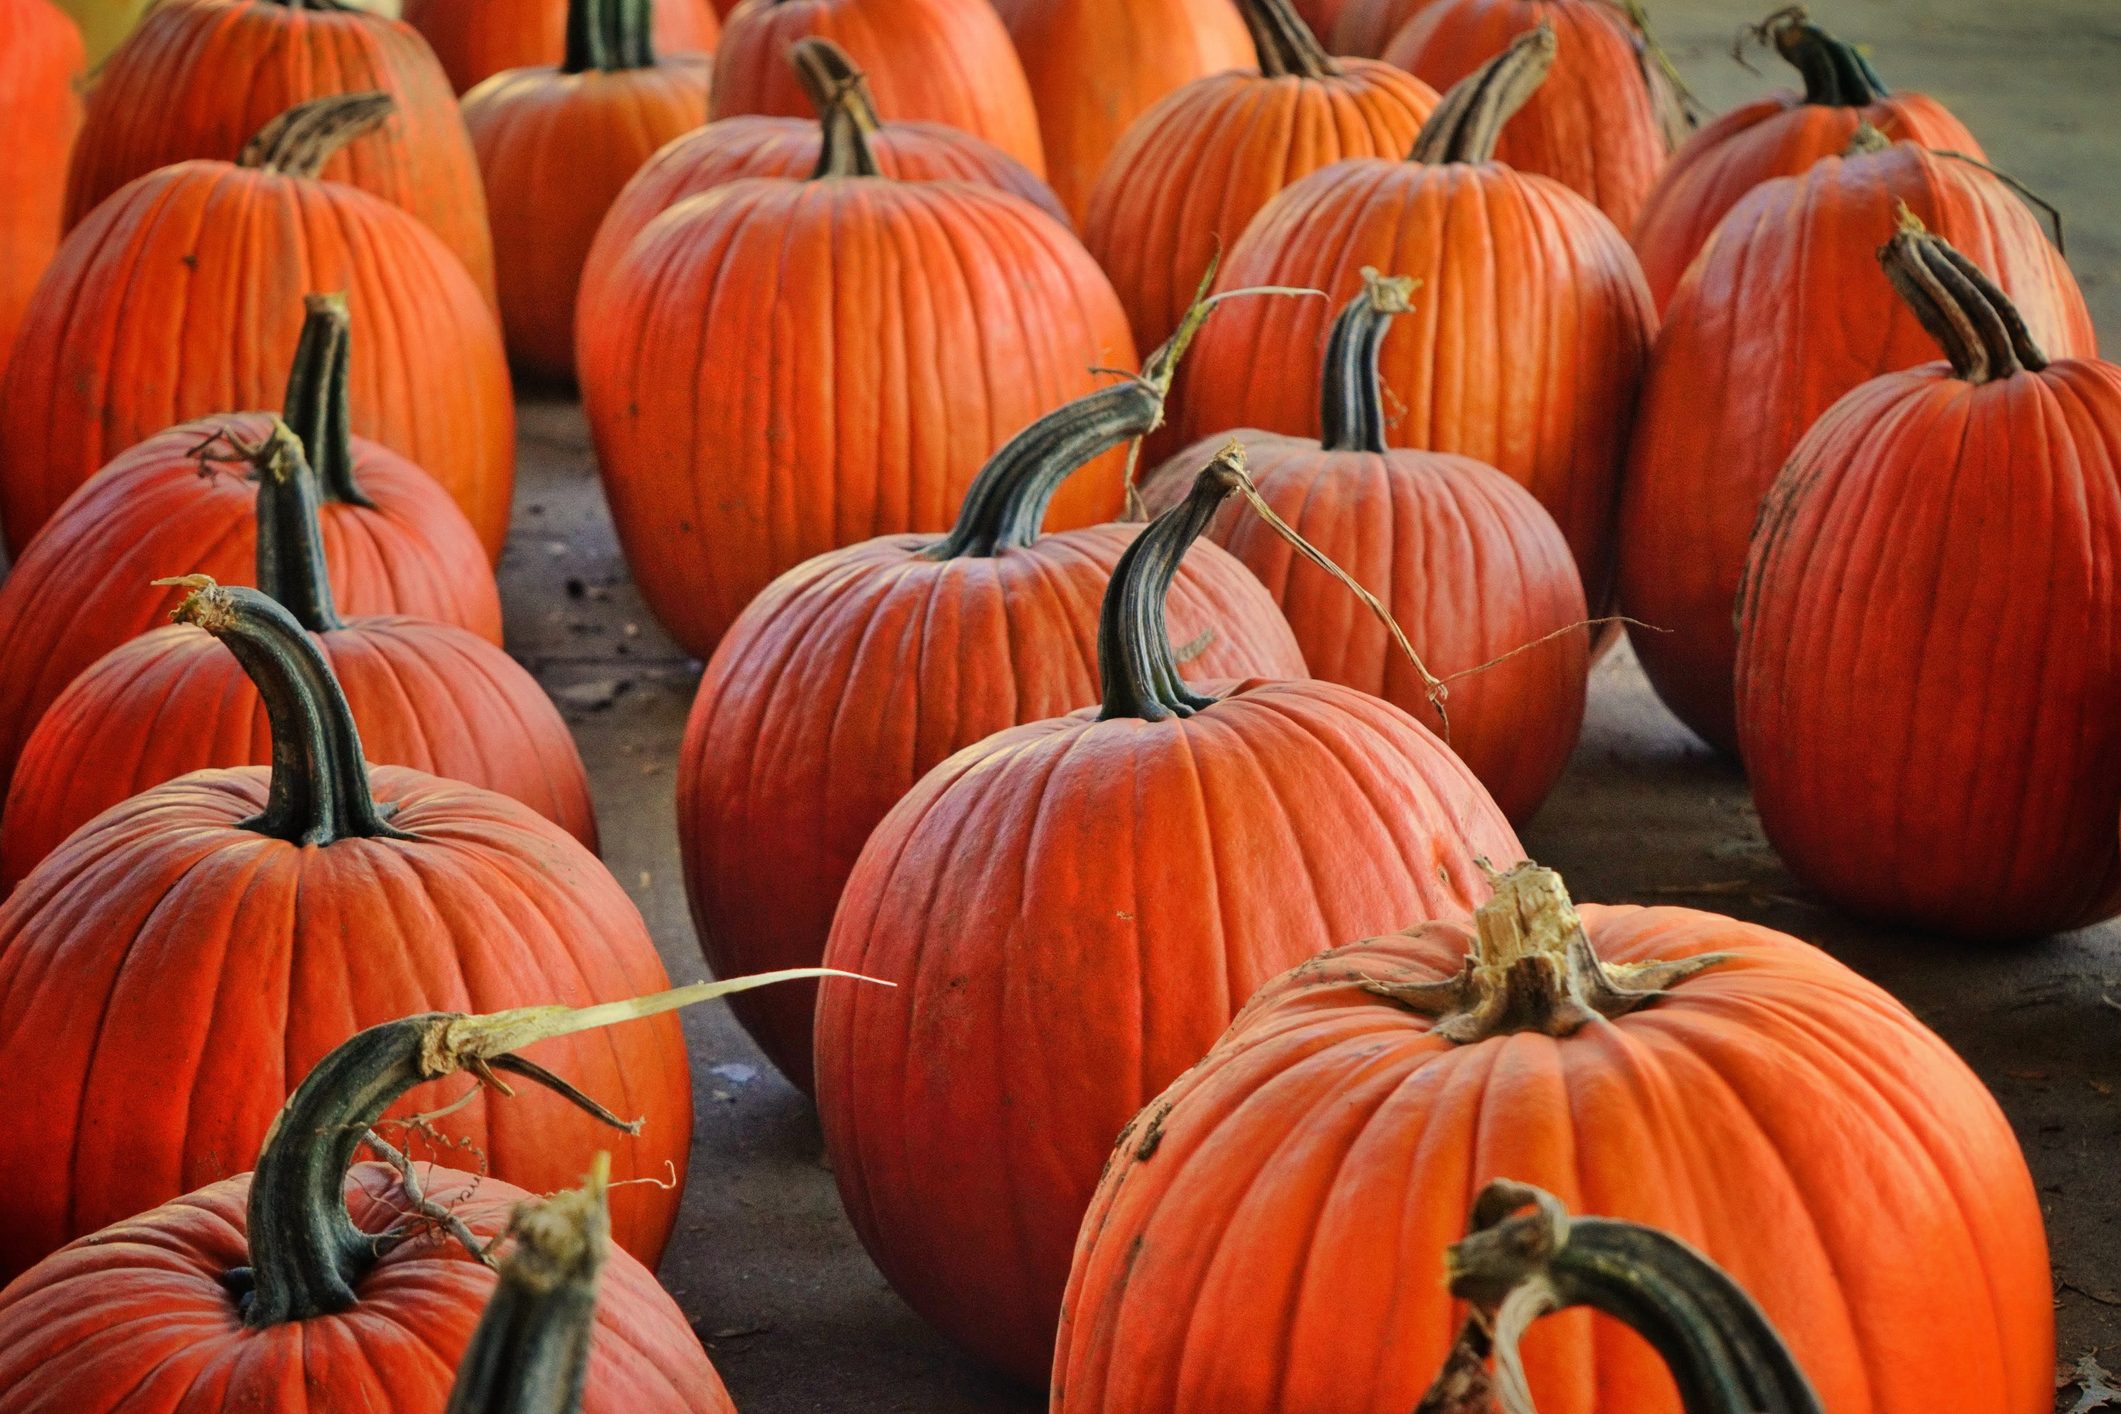 pumpkin patches in and near portland the official guide to portland on where can i buy pumpkins near me now